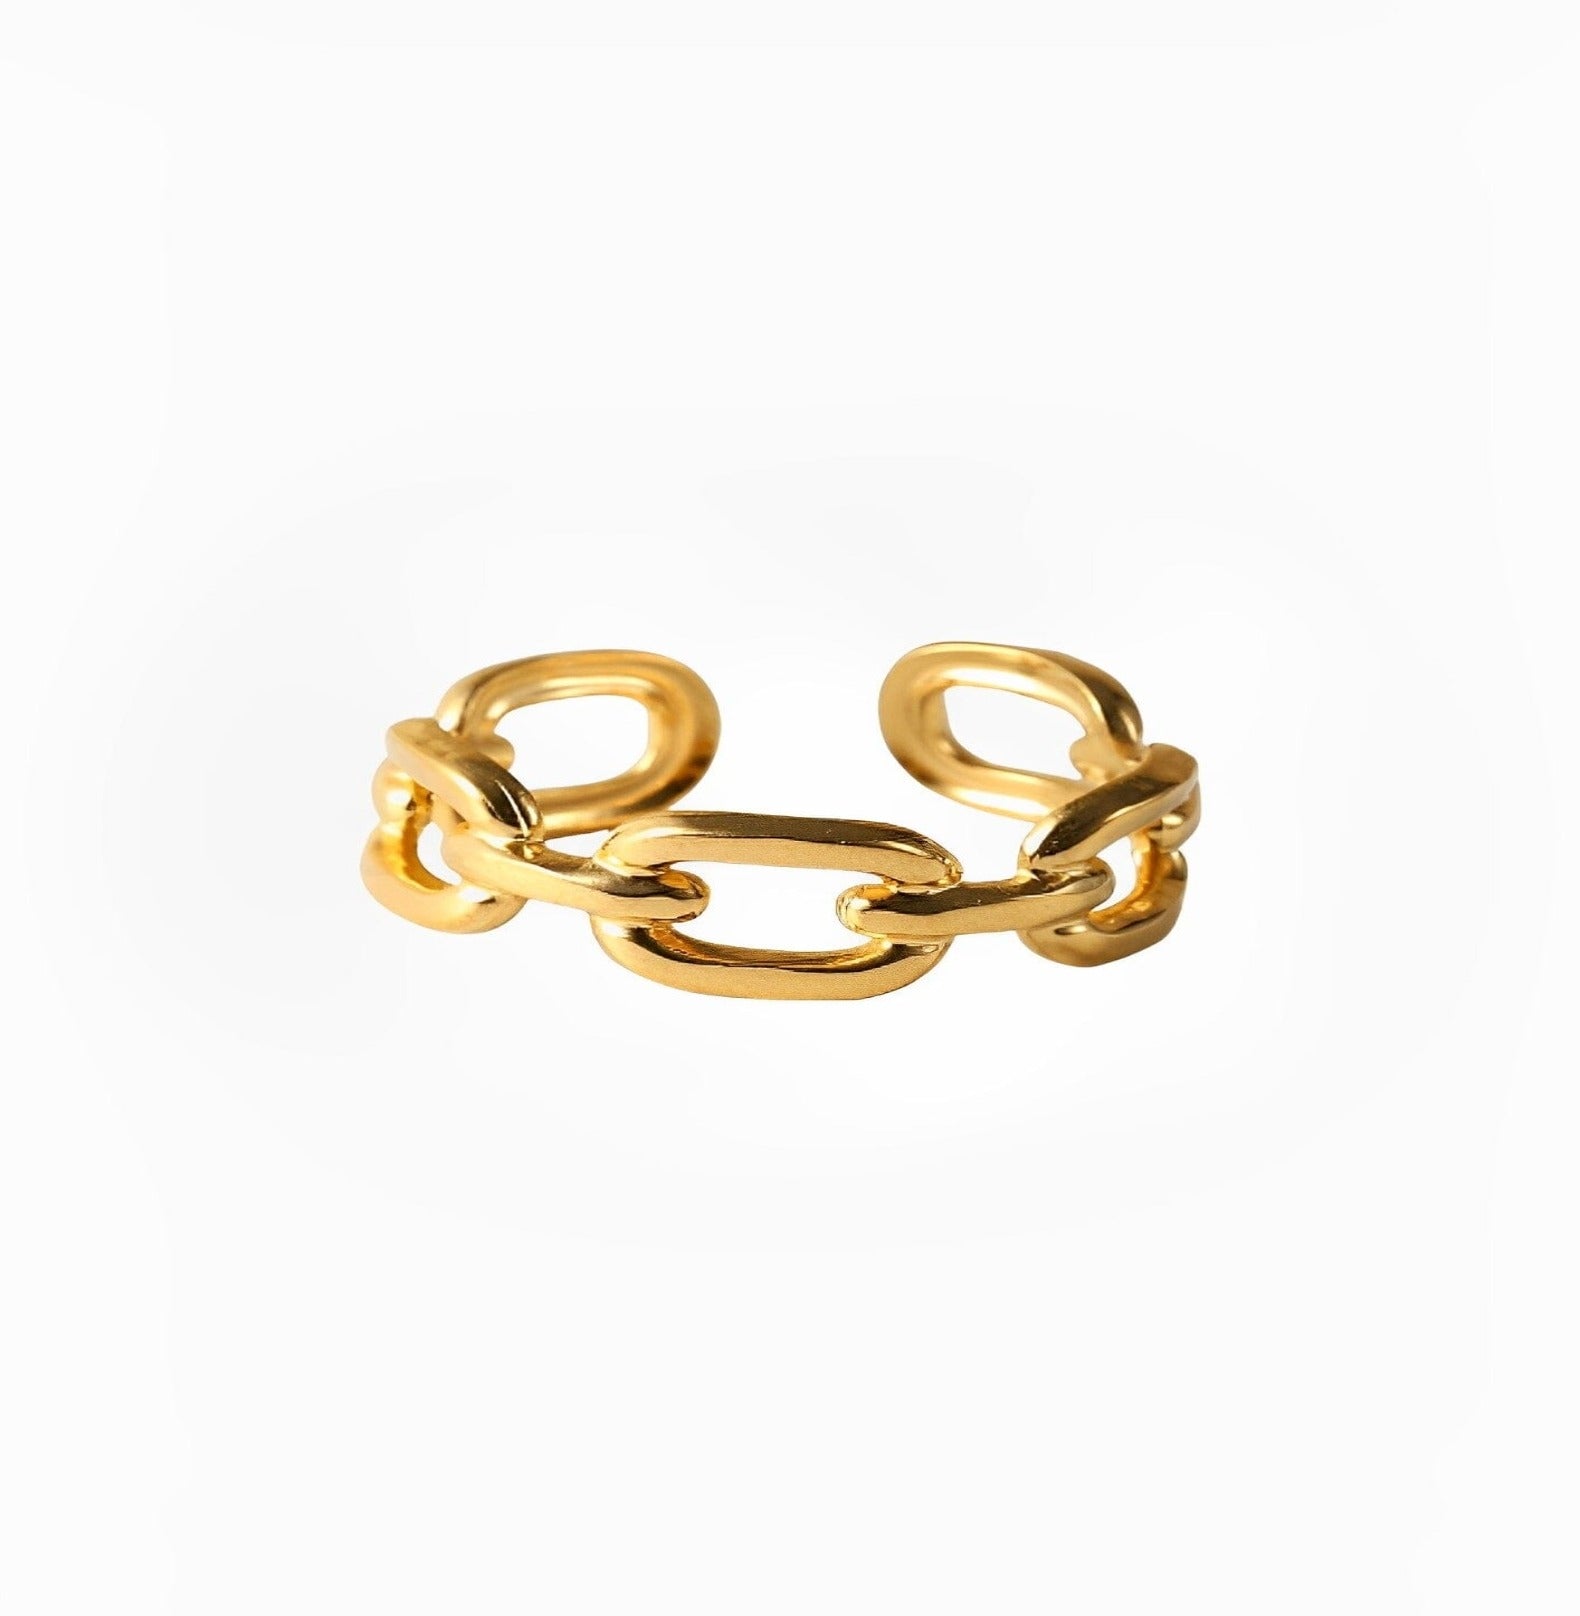 ALIZ RING ring Yubama Jewelry Online Store - The Elegant Designs of Gold and Silver ! 